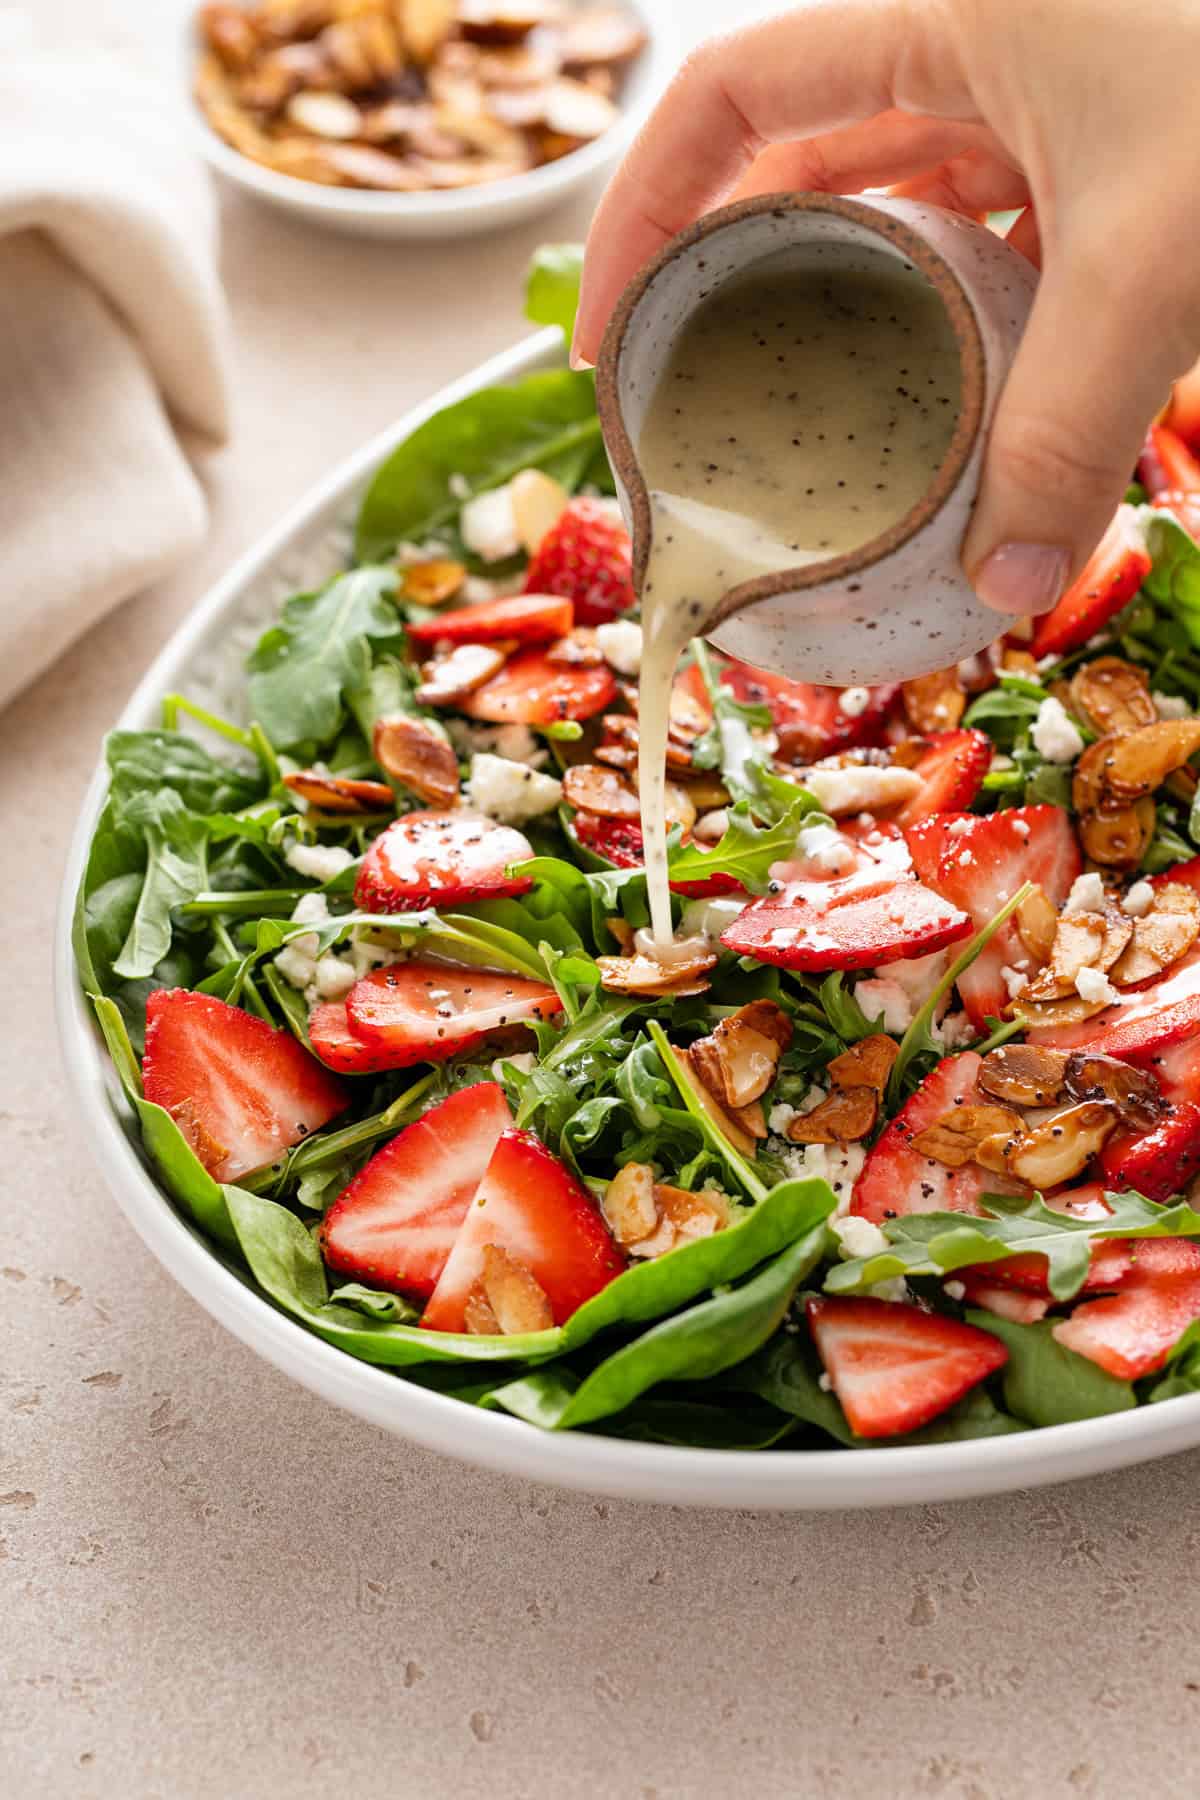 Poppy seed dressing being poured over strawberry salad in a serving bowl.